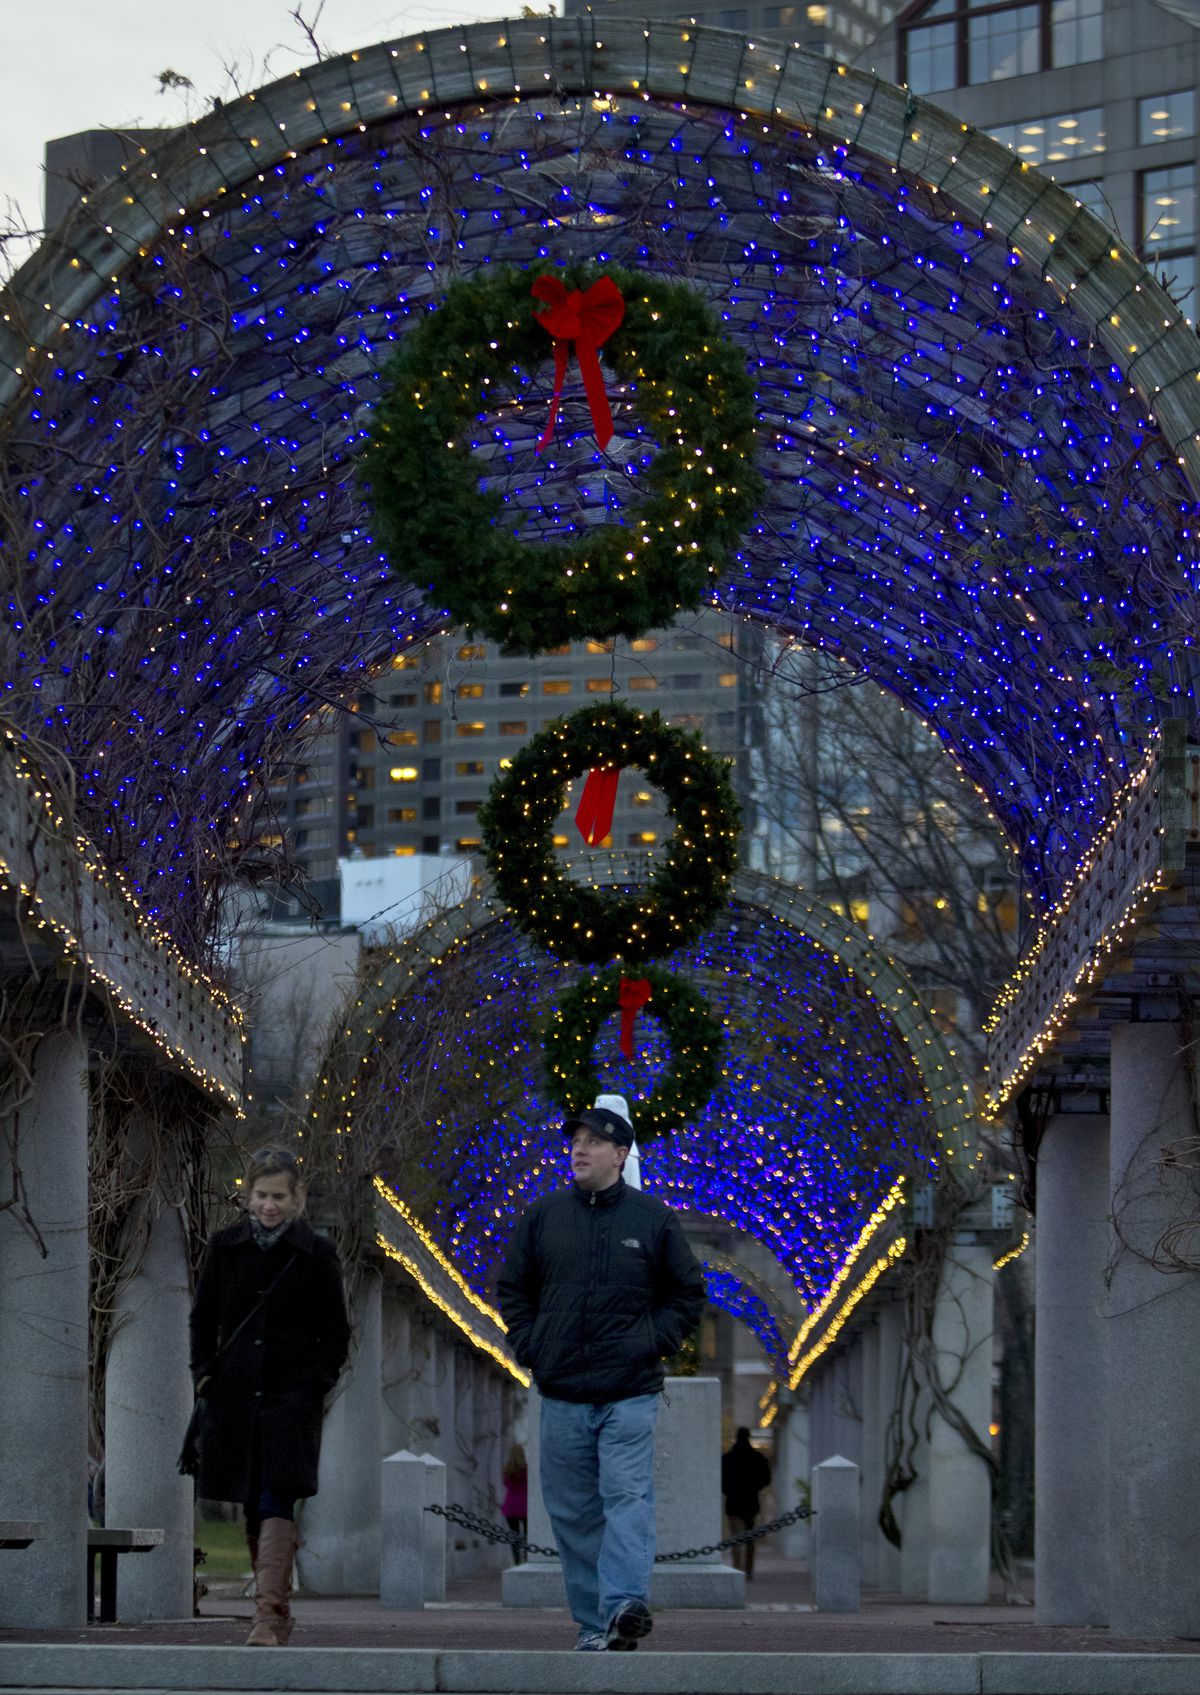 A trellis entwined with bright lights, and people are walking under the trellis.